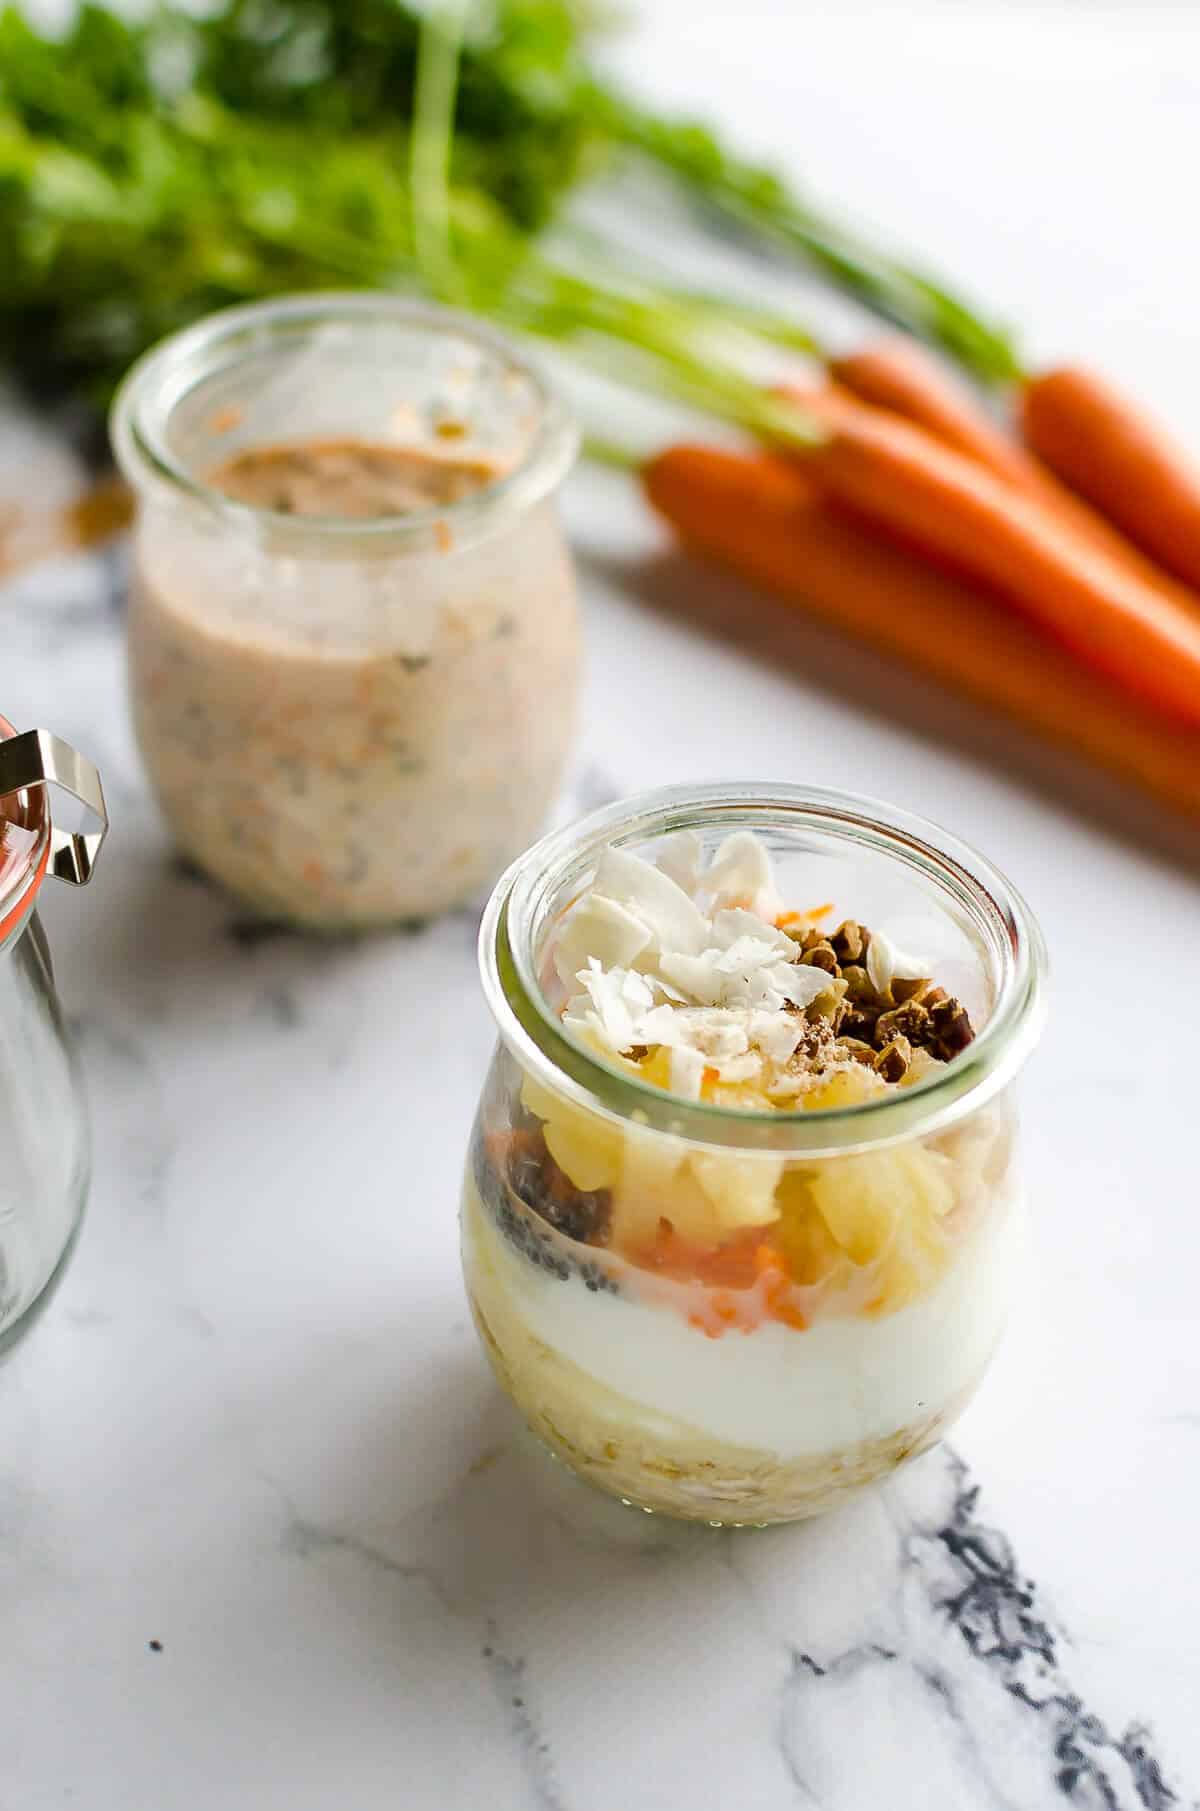 2 jars filled with carrot cake overnight oats ingredients, one stirred, one not stirred, includes yogurt, milk, oats, pineapple, coconut, carrots and pecans